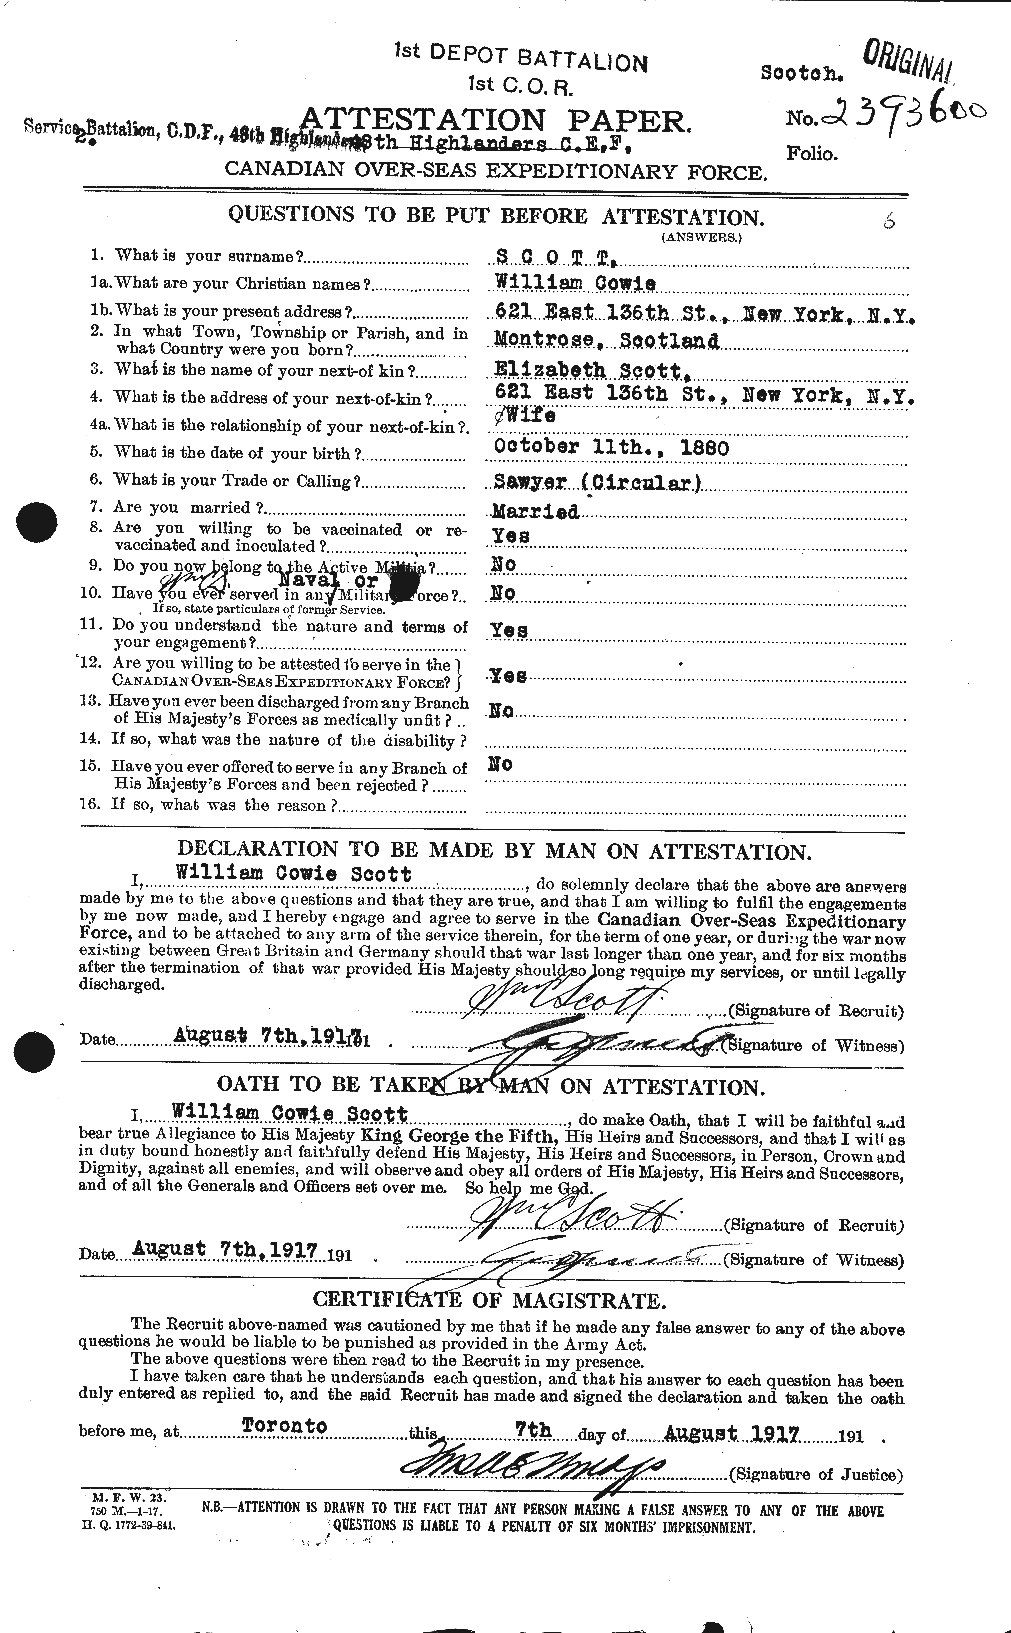 Personnel Records of the First World War - CEF 087036a